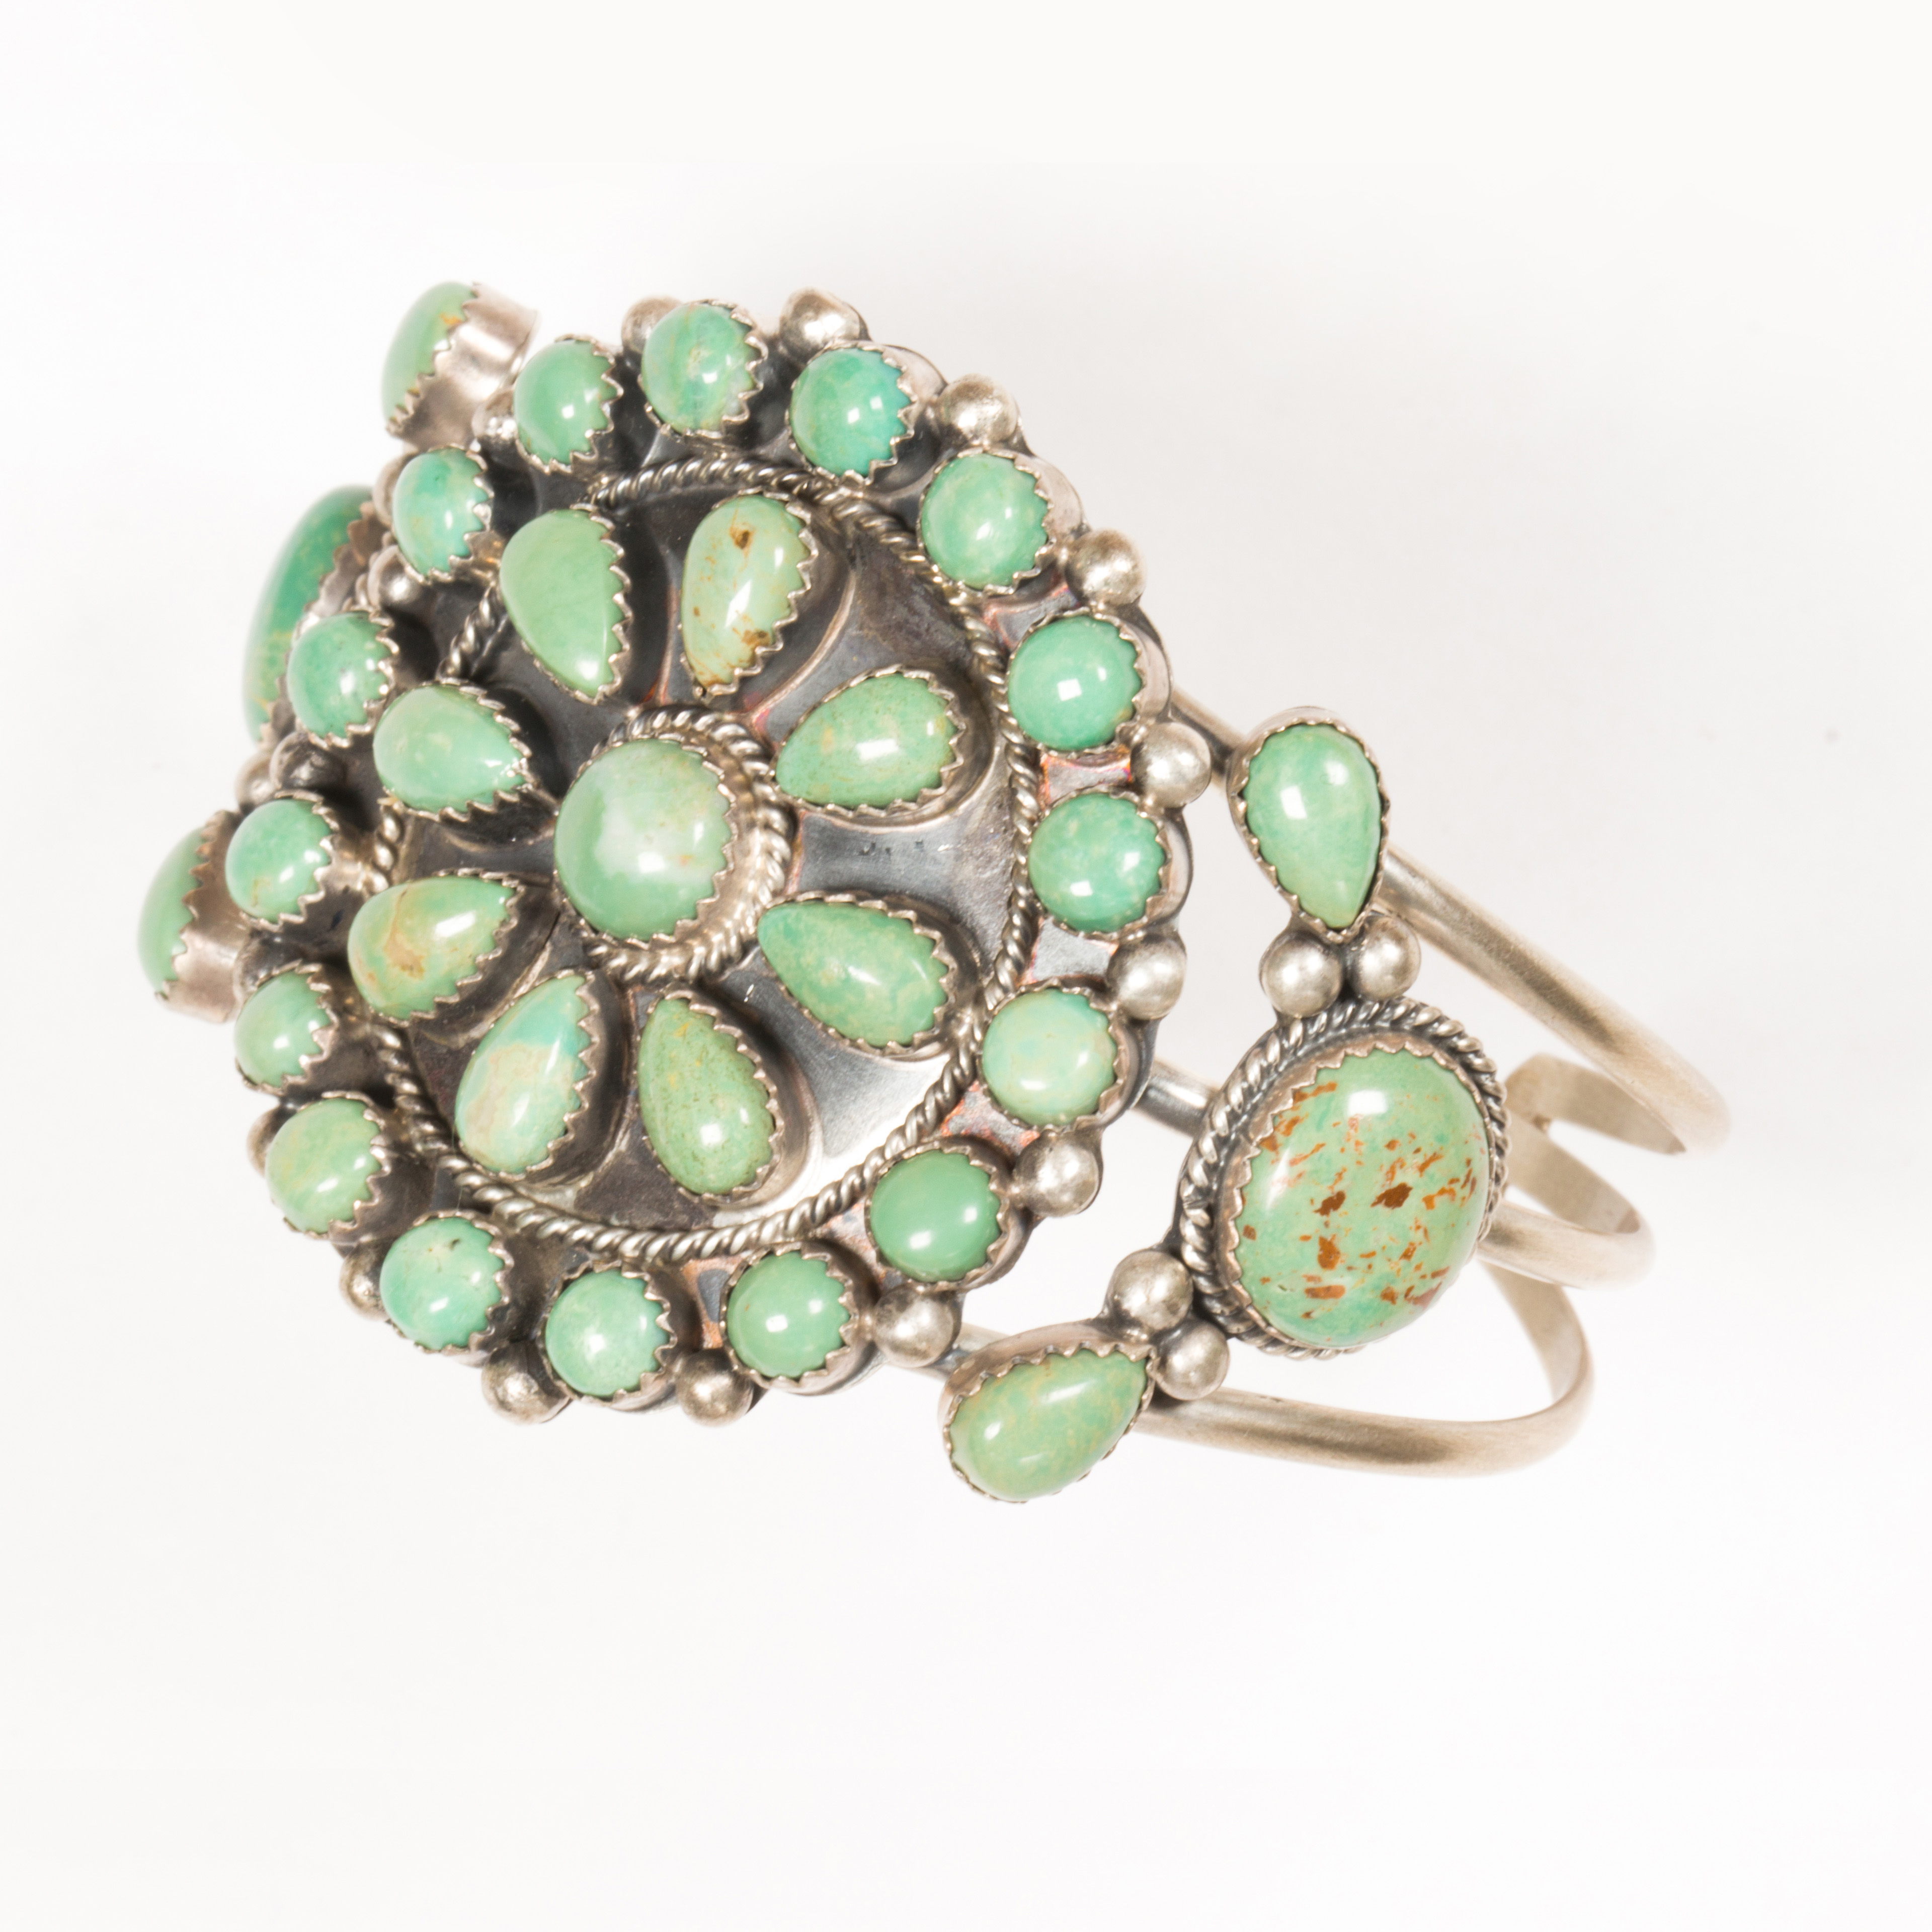 A NATIVE AMERICAN TURQUOISE AND